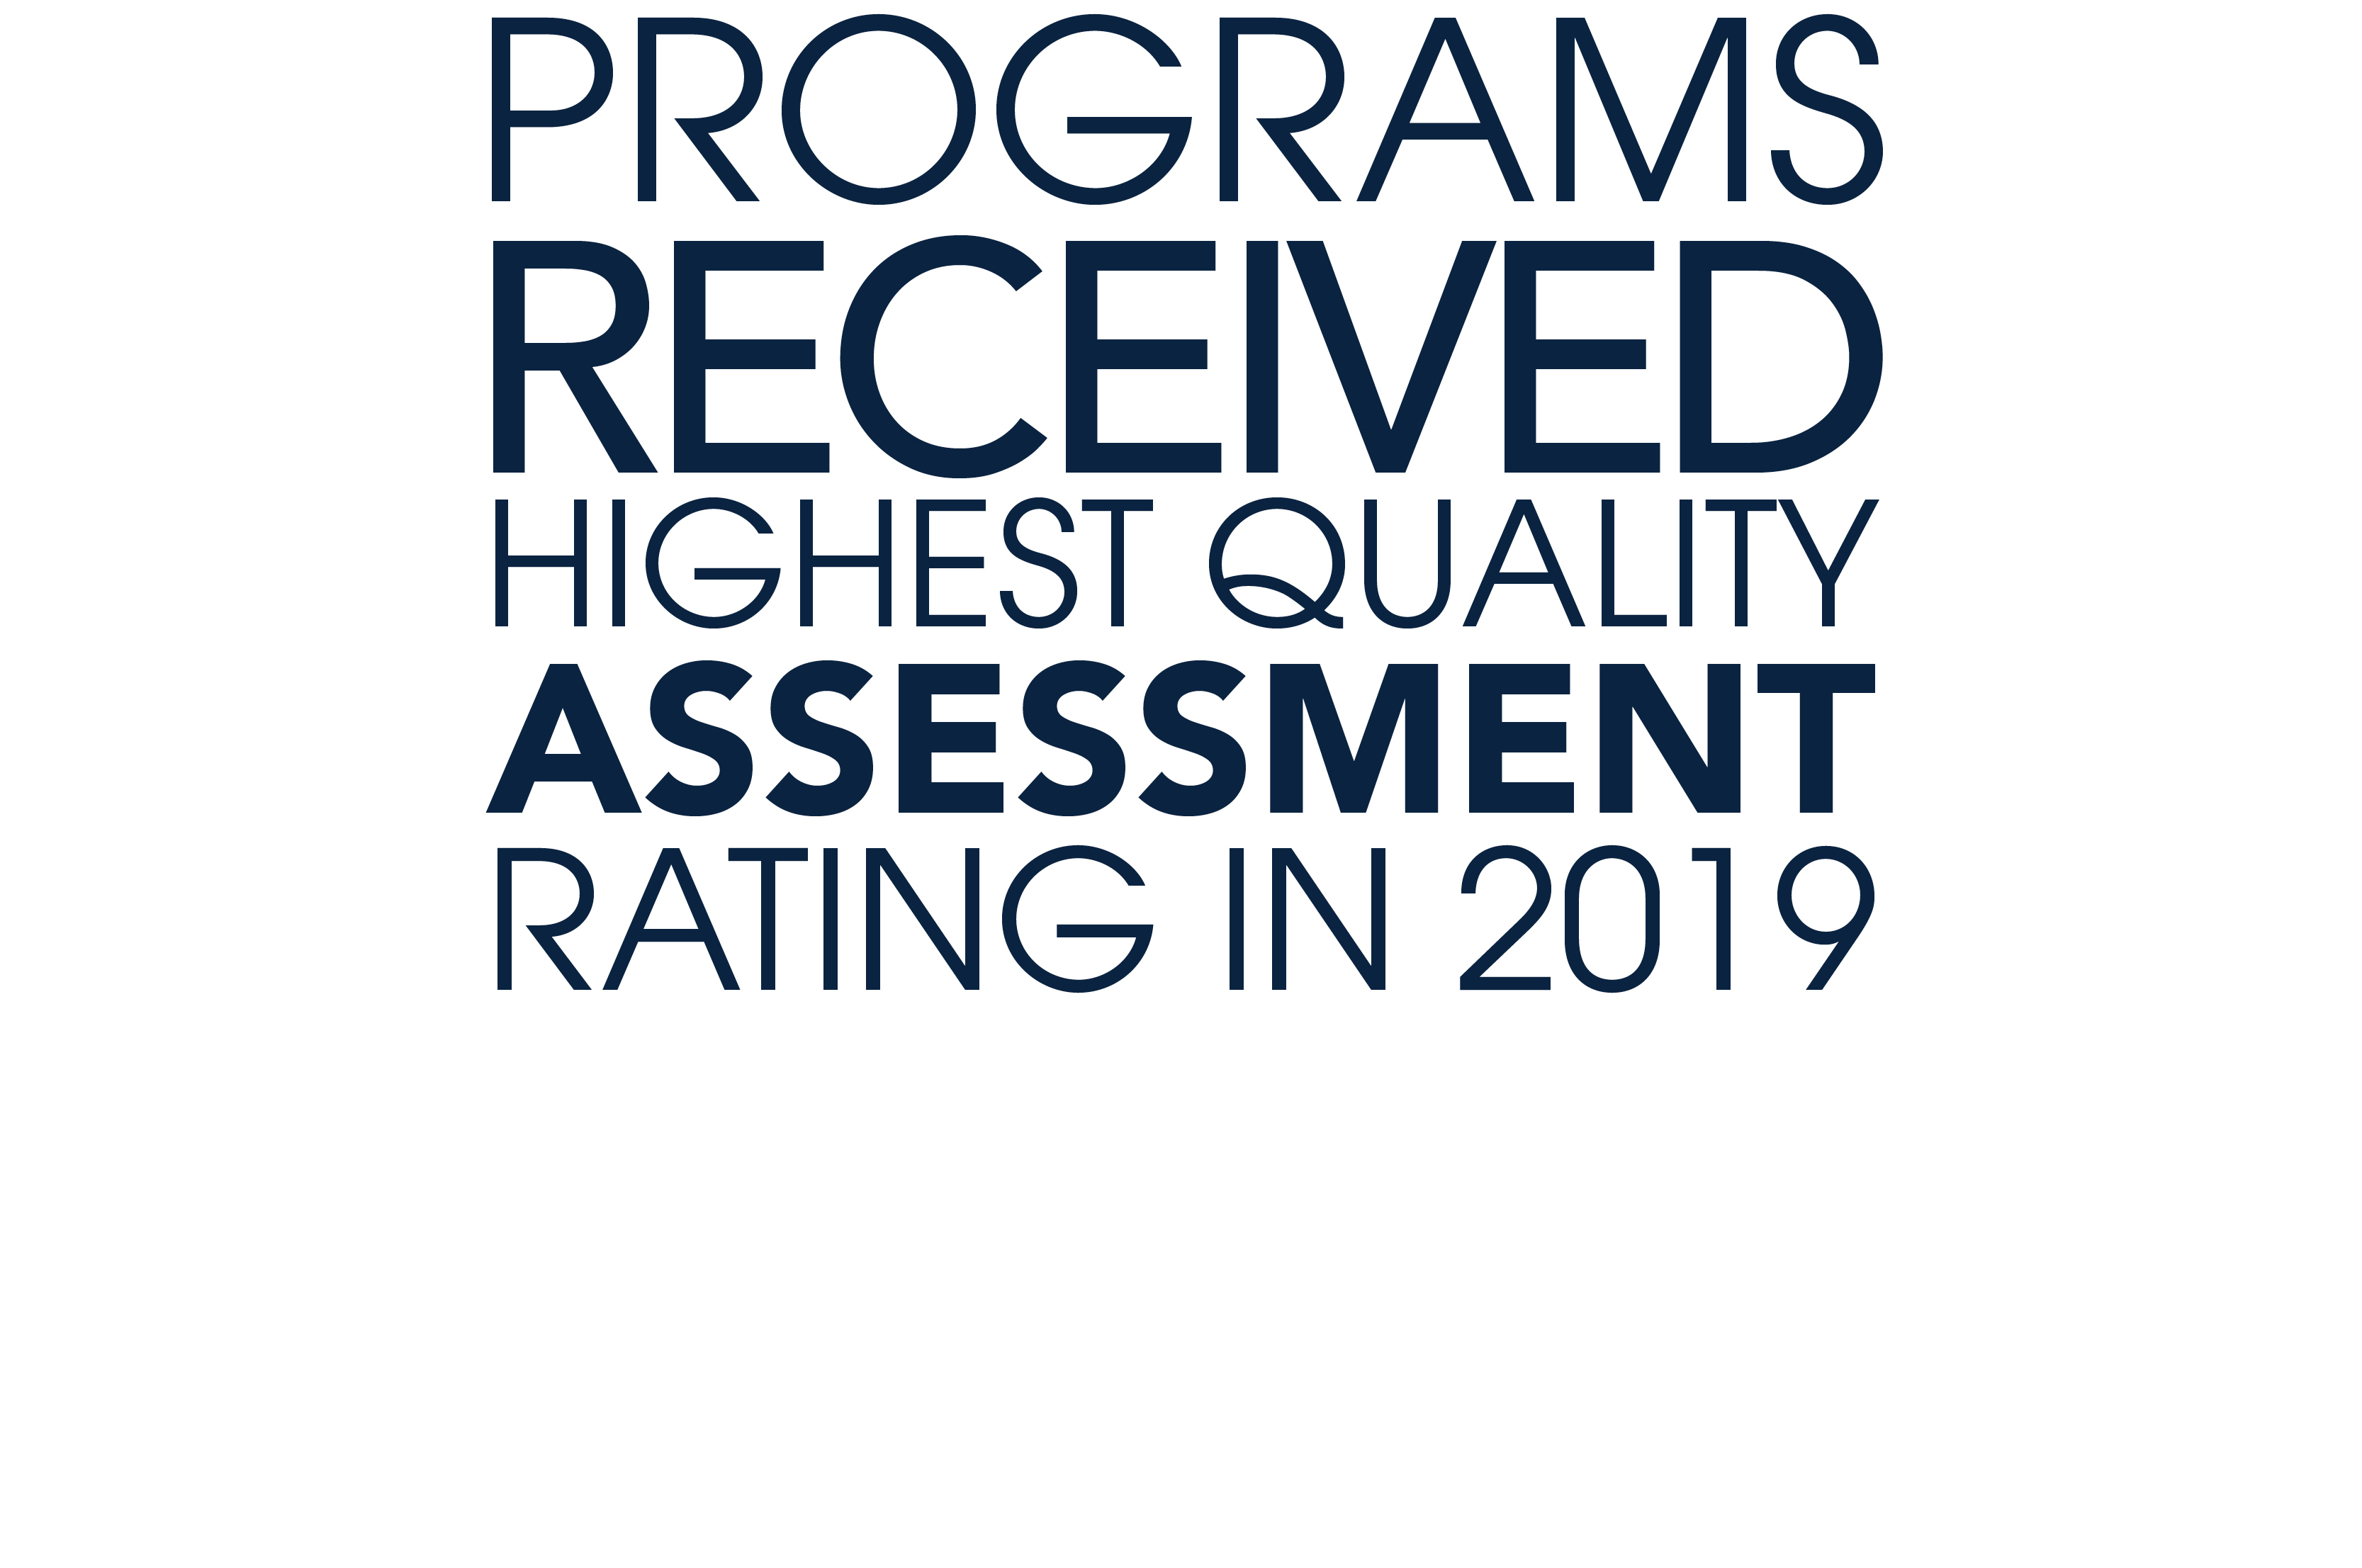 Programs recieved highest quality assessment rating in 2019